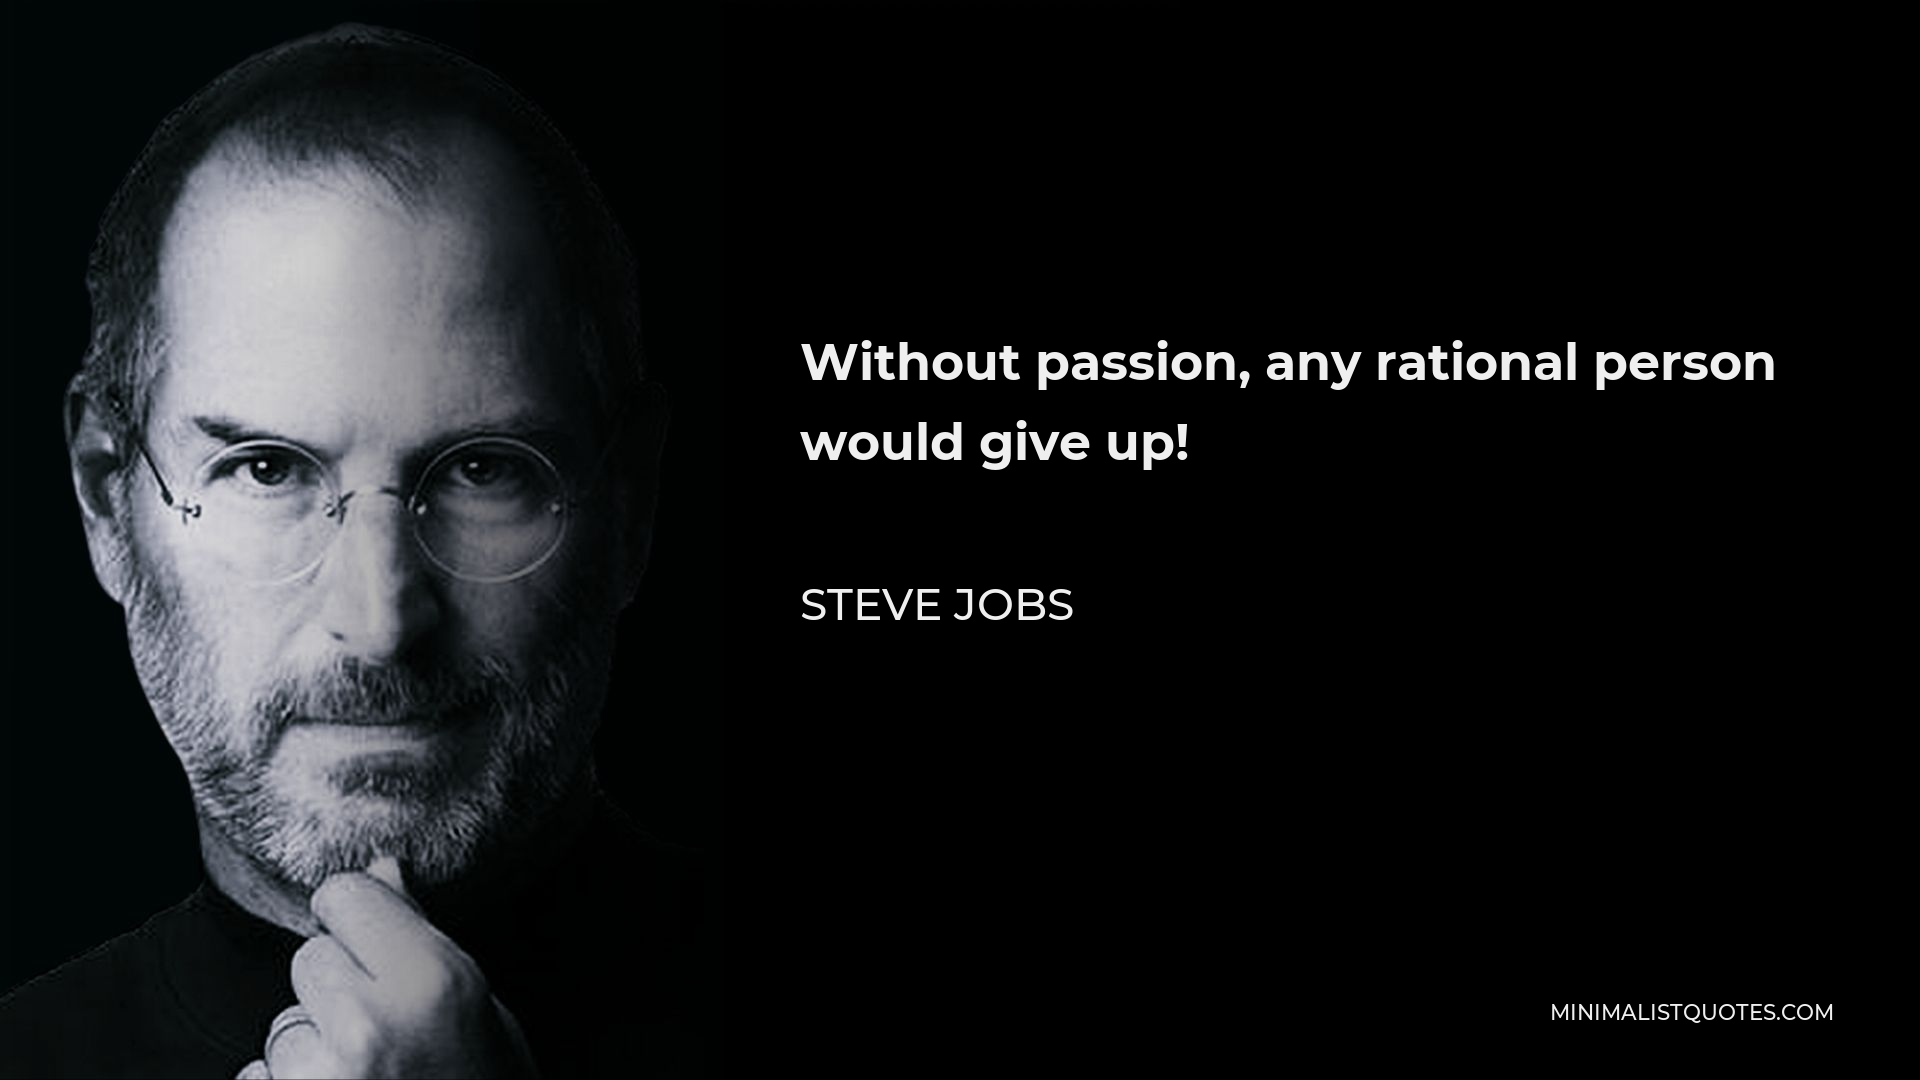 Steve Jobs Quote Without Passion Any Rational Person Would Give Up 